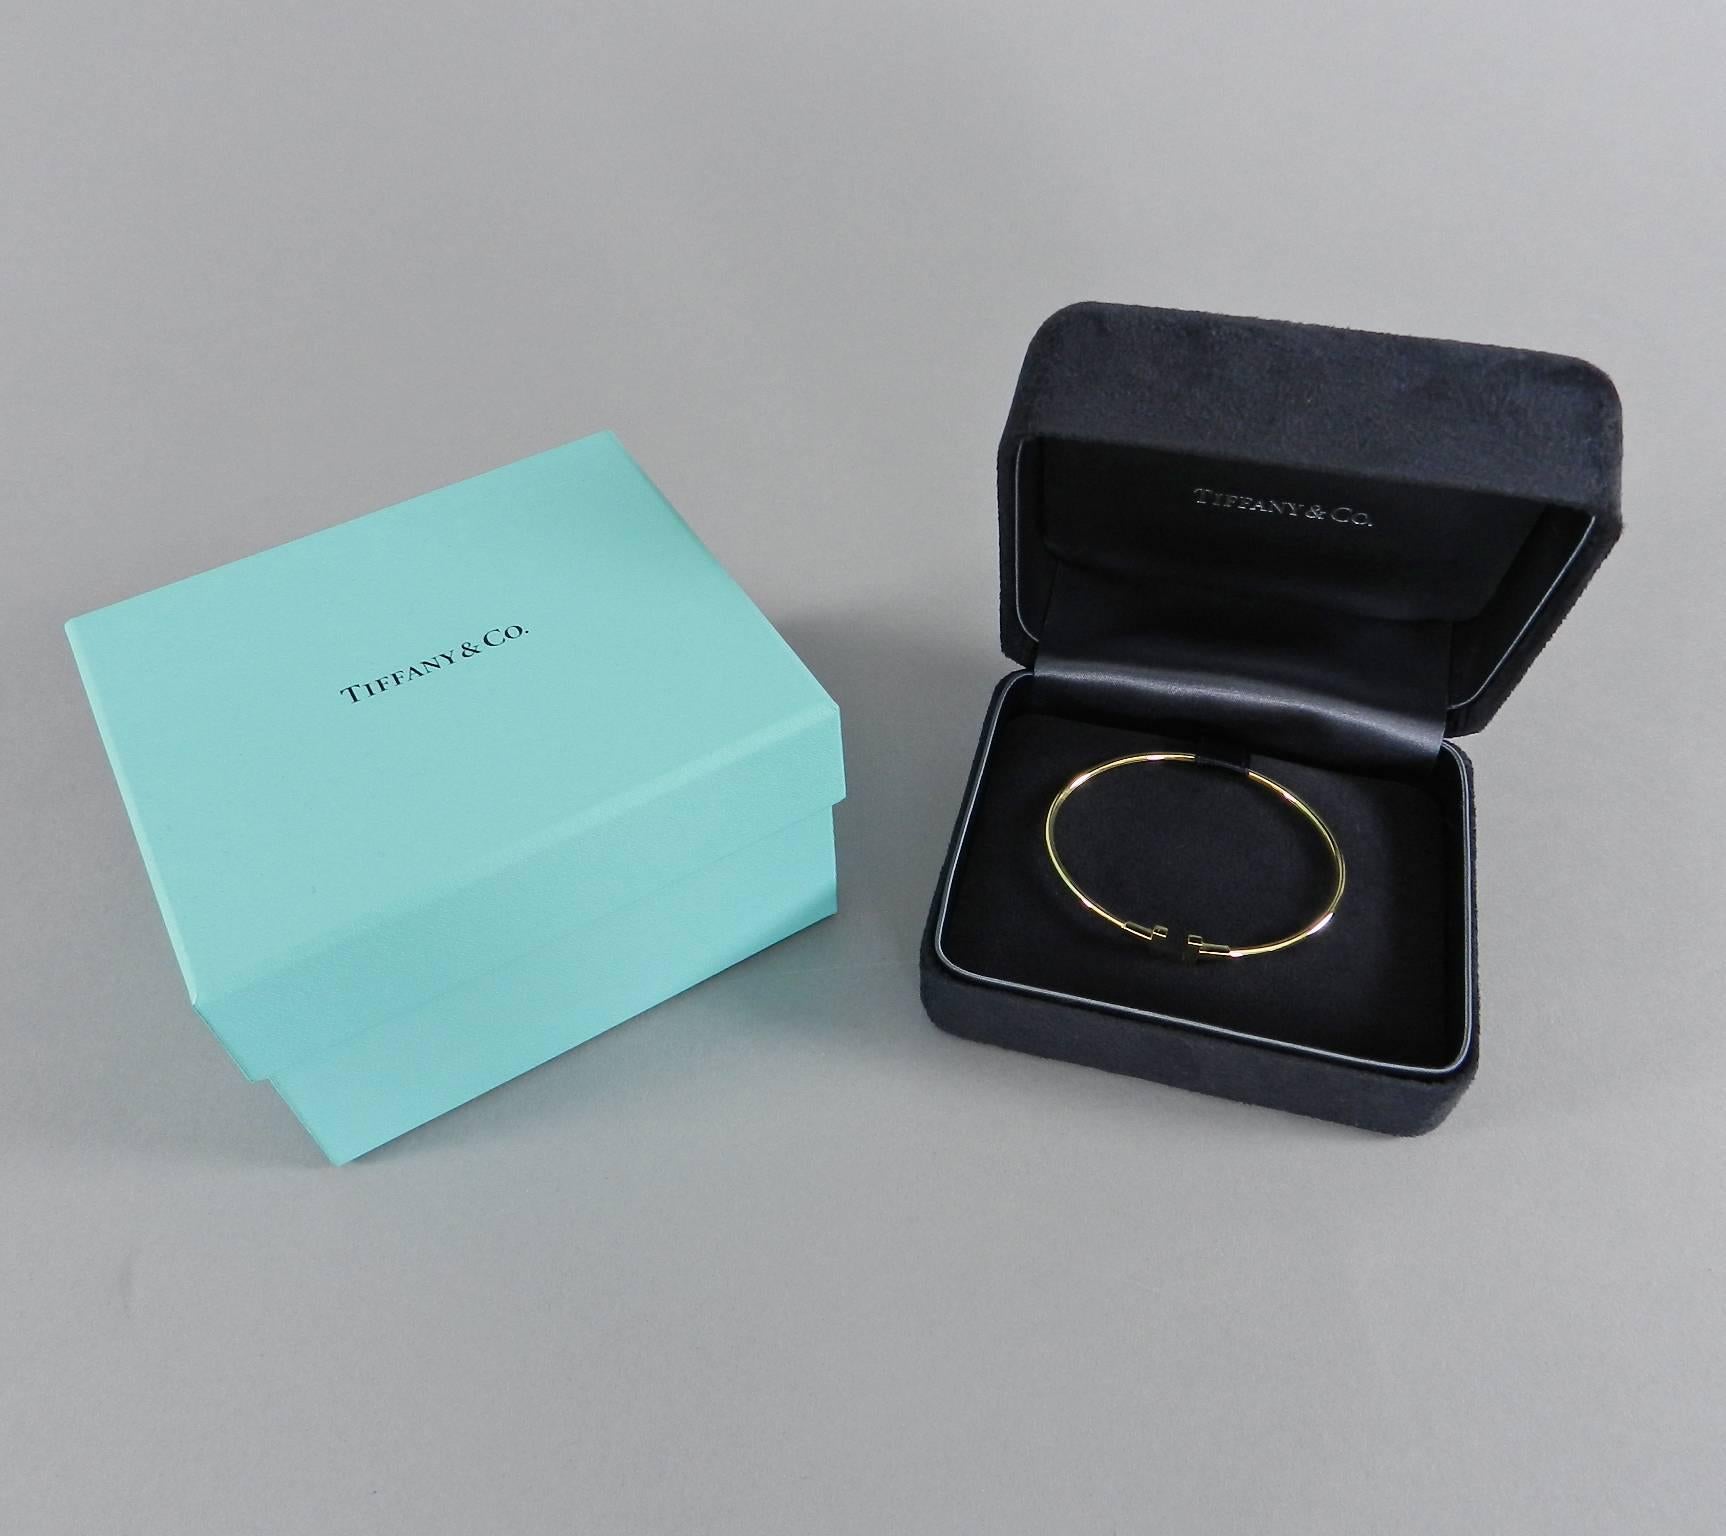 Tiffany and Co 18k yellow gold Narrow T wire bracelet. Brand new - received as a gift and never worn. Includes original black velvet box and blue Tiffany box. Size small. Measures 6-1/8" interior circumference (155 mm) and Tiffany website says